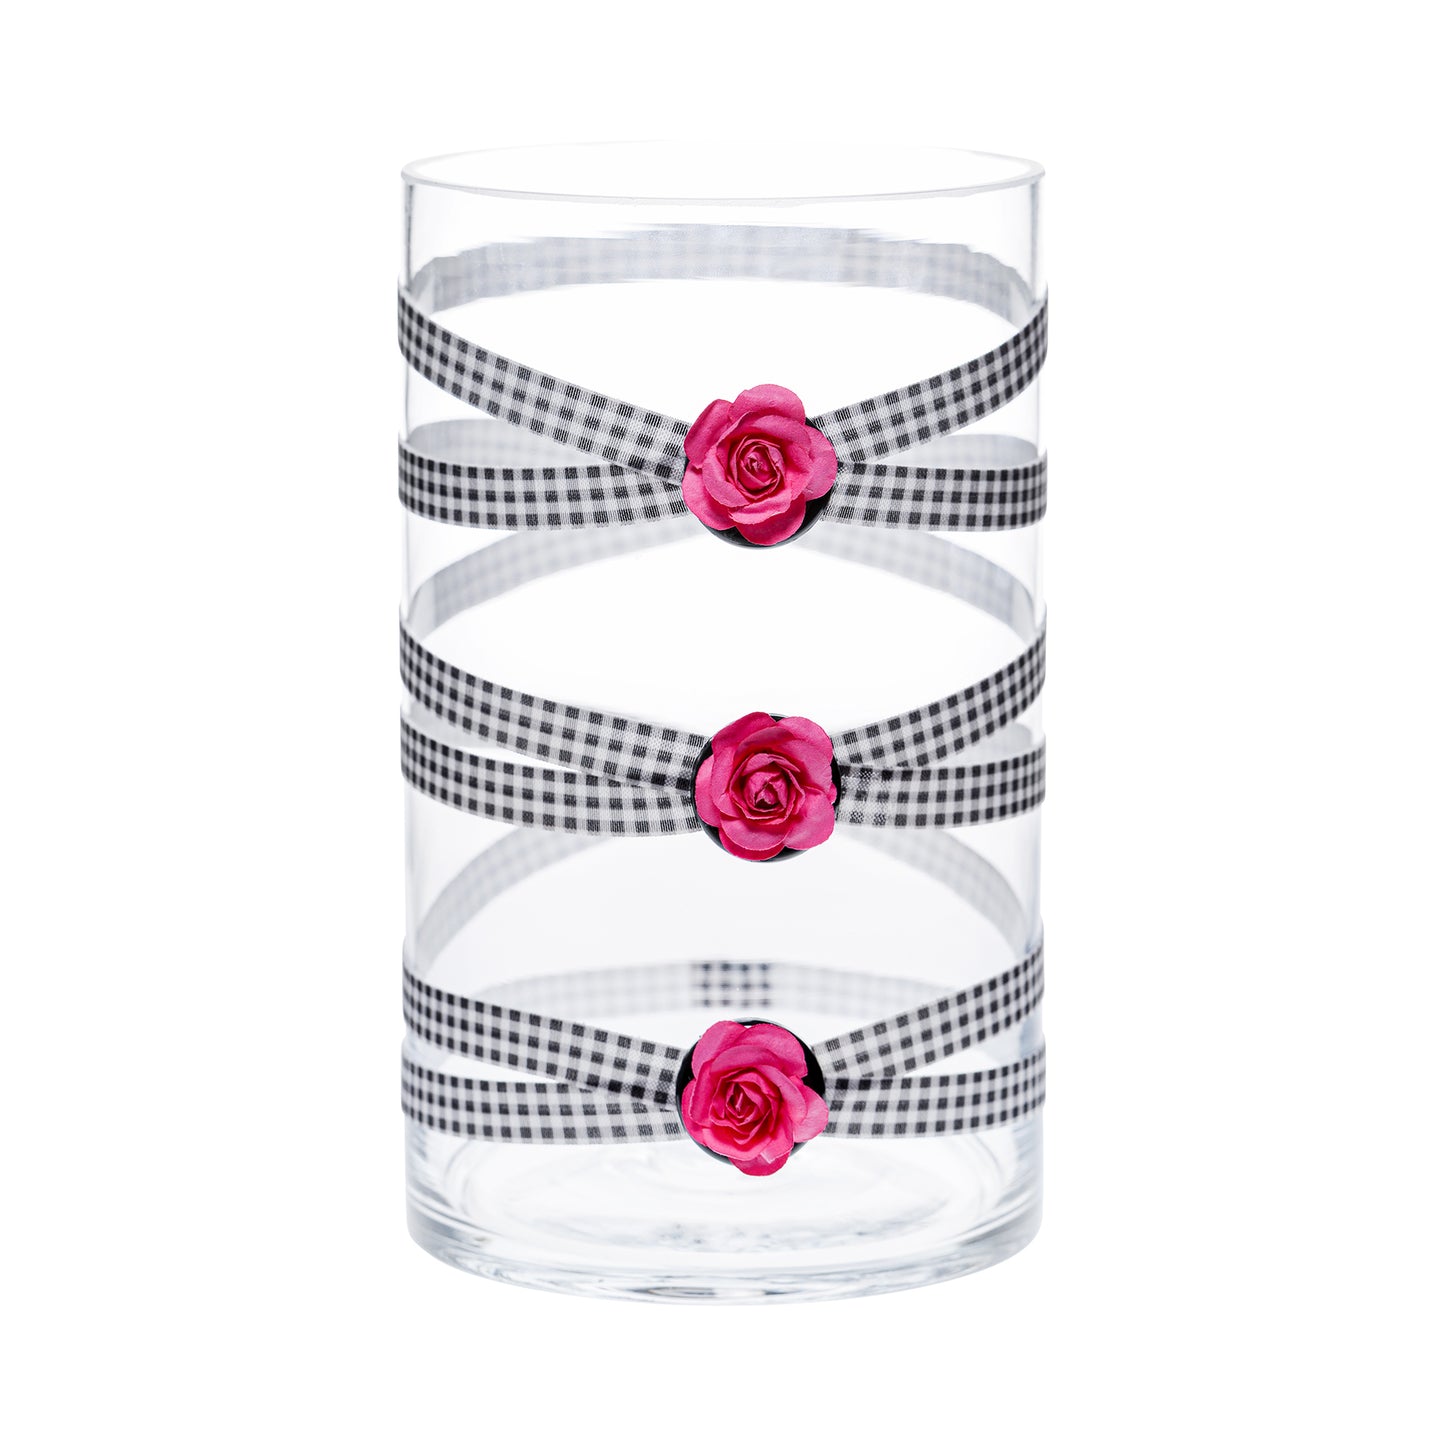 Front of Glass Wrappings 6" x 10" cylinder wrapped in black & white check elastic, decorated with 3 pink daisies.